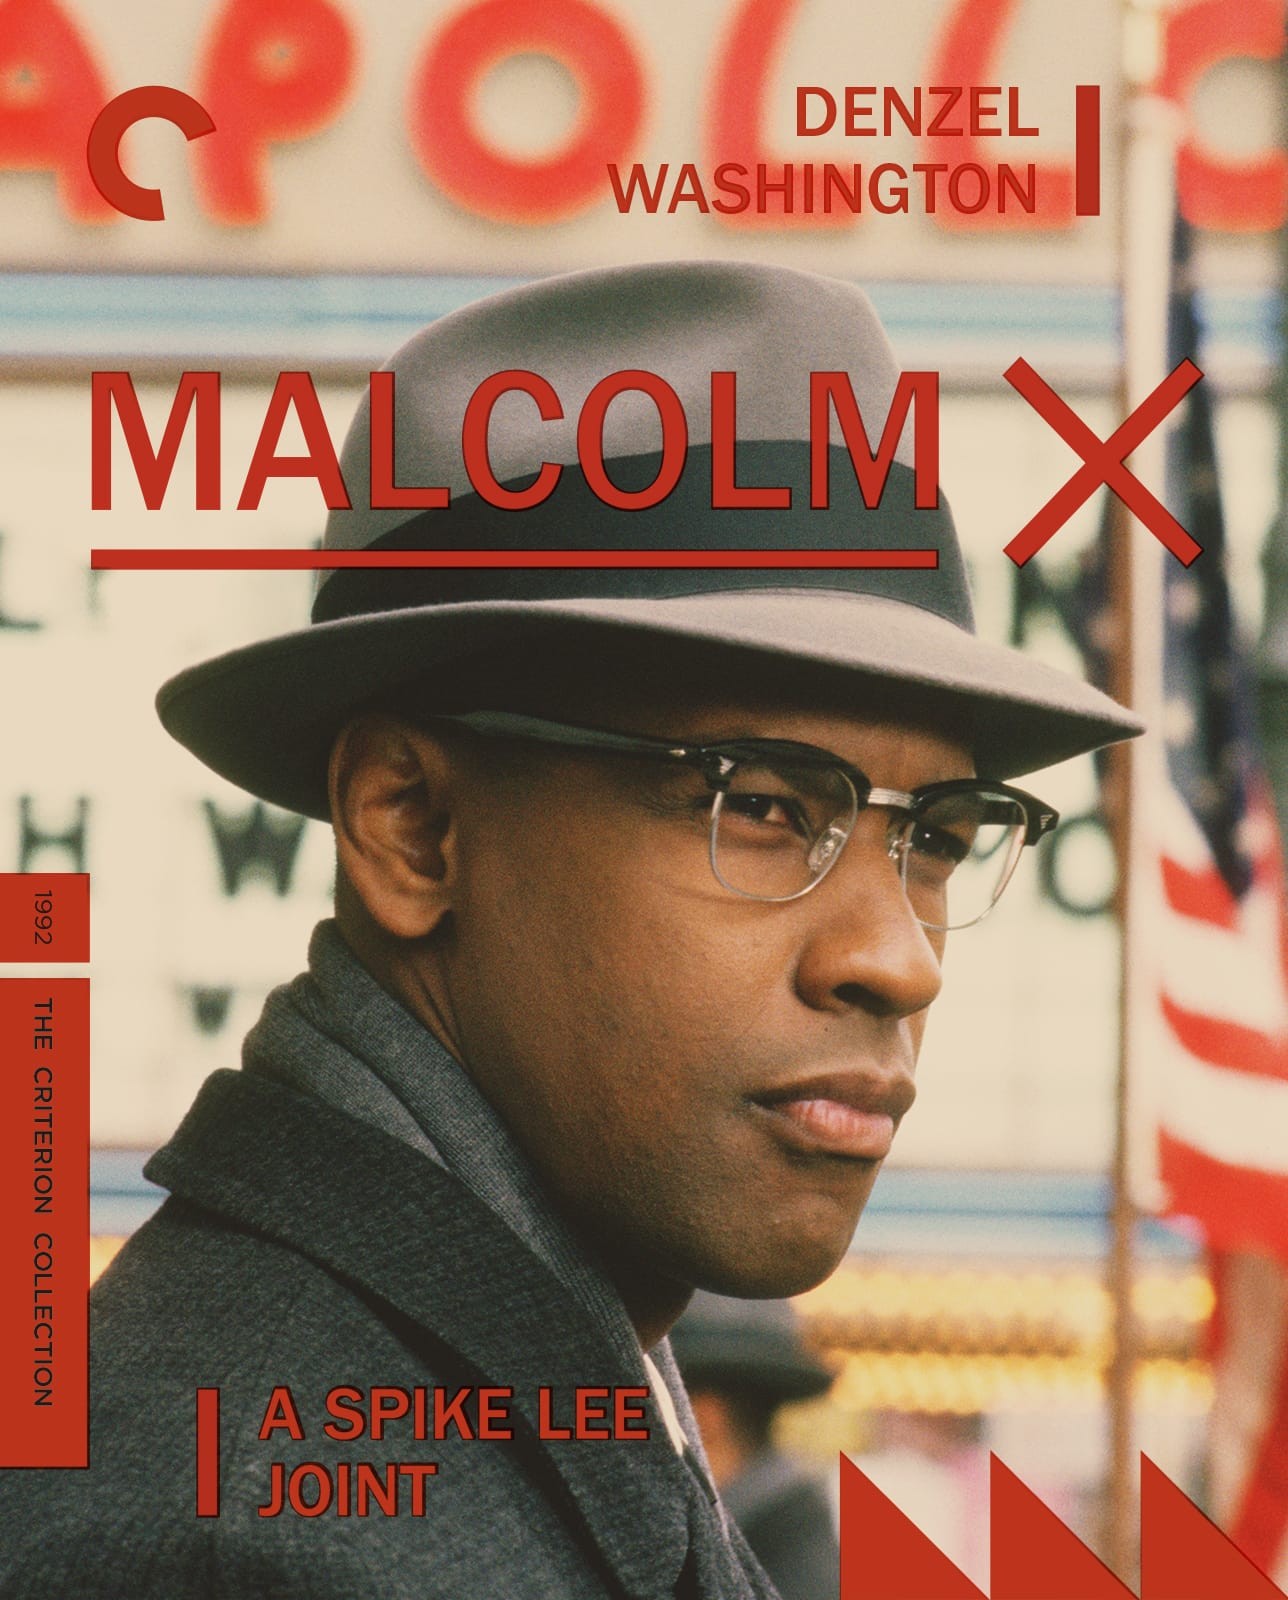 Malcolm X 4k Blu-ray Criterion Collection